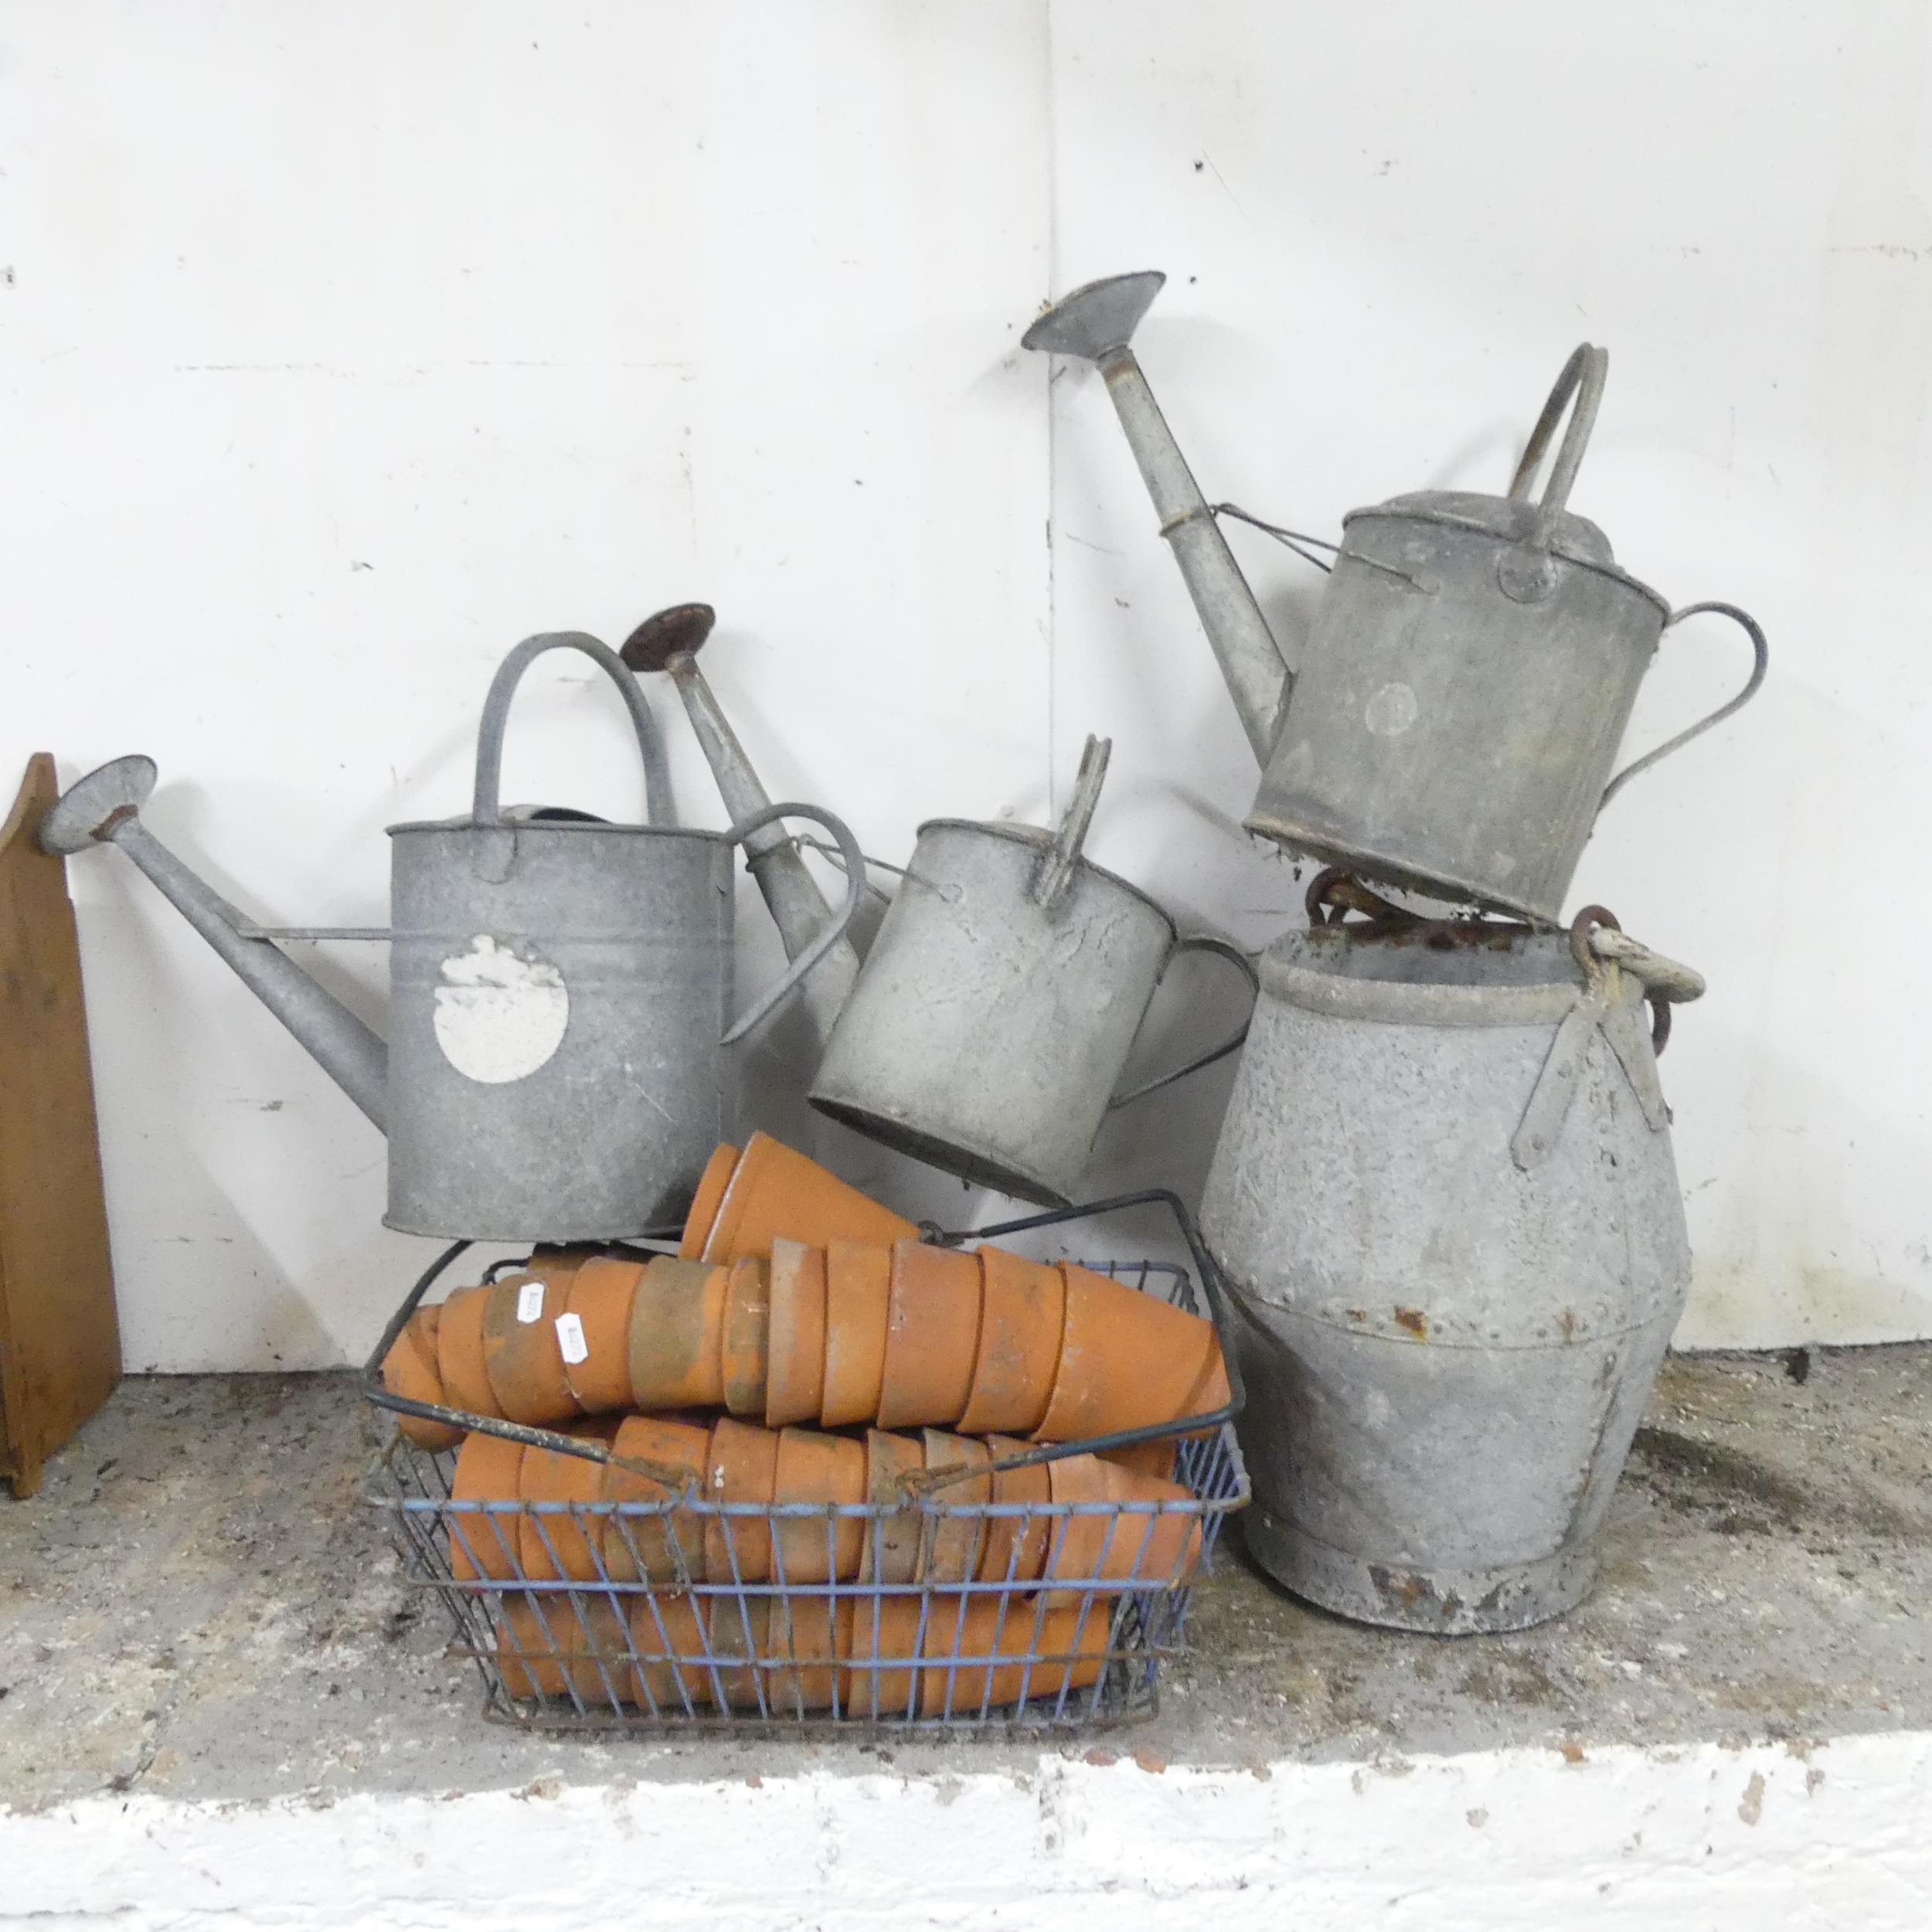 Three galvanised watering cans, a galvanised pail, and a quantity of small terracotta plant pots.